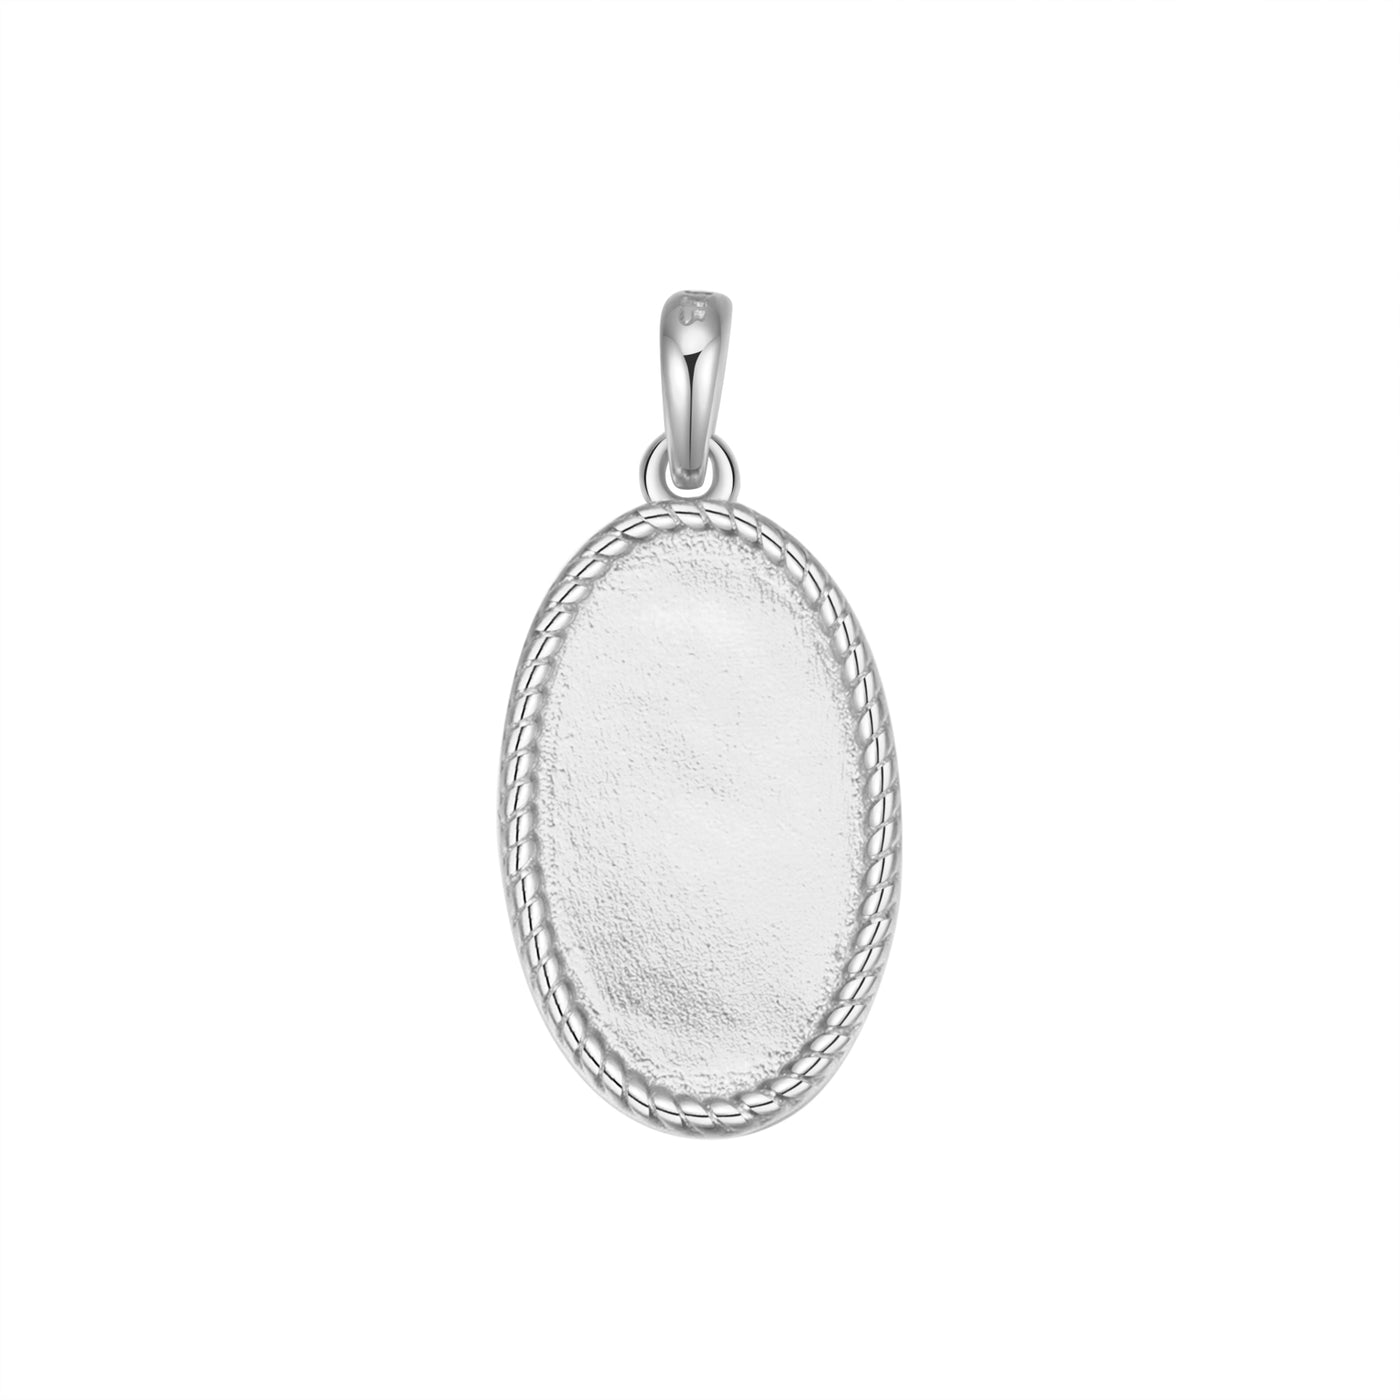 Oval Rope Pendant Necklace Sterling Silver